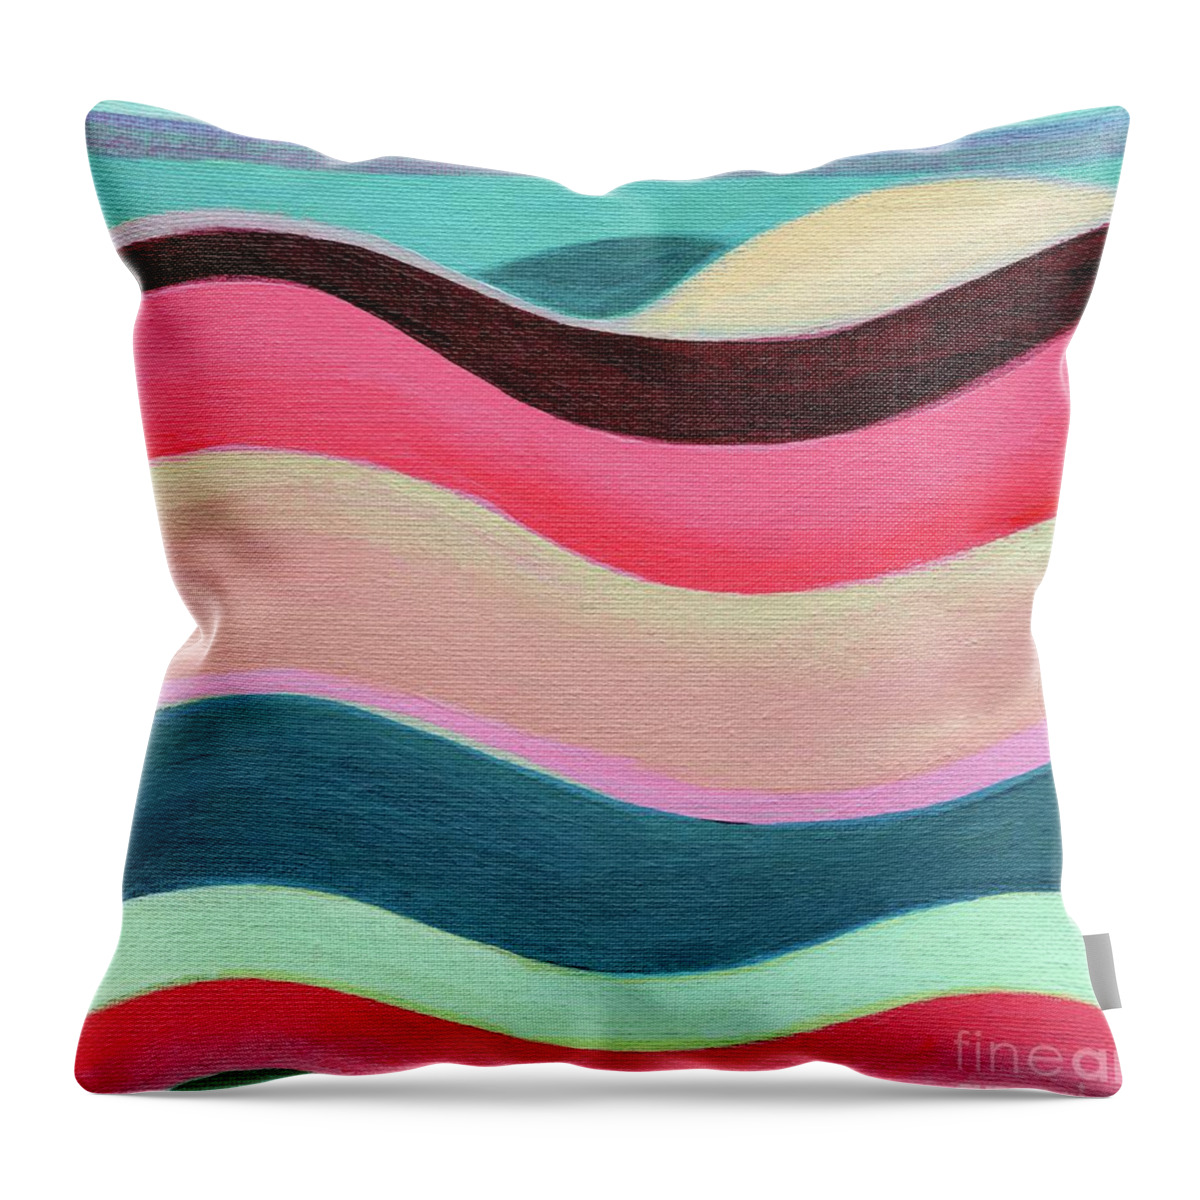 The Joy Of Design Throw Pillow featuring the painting The Joy of Design X L V by Helena Tiainen